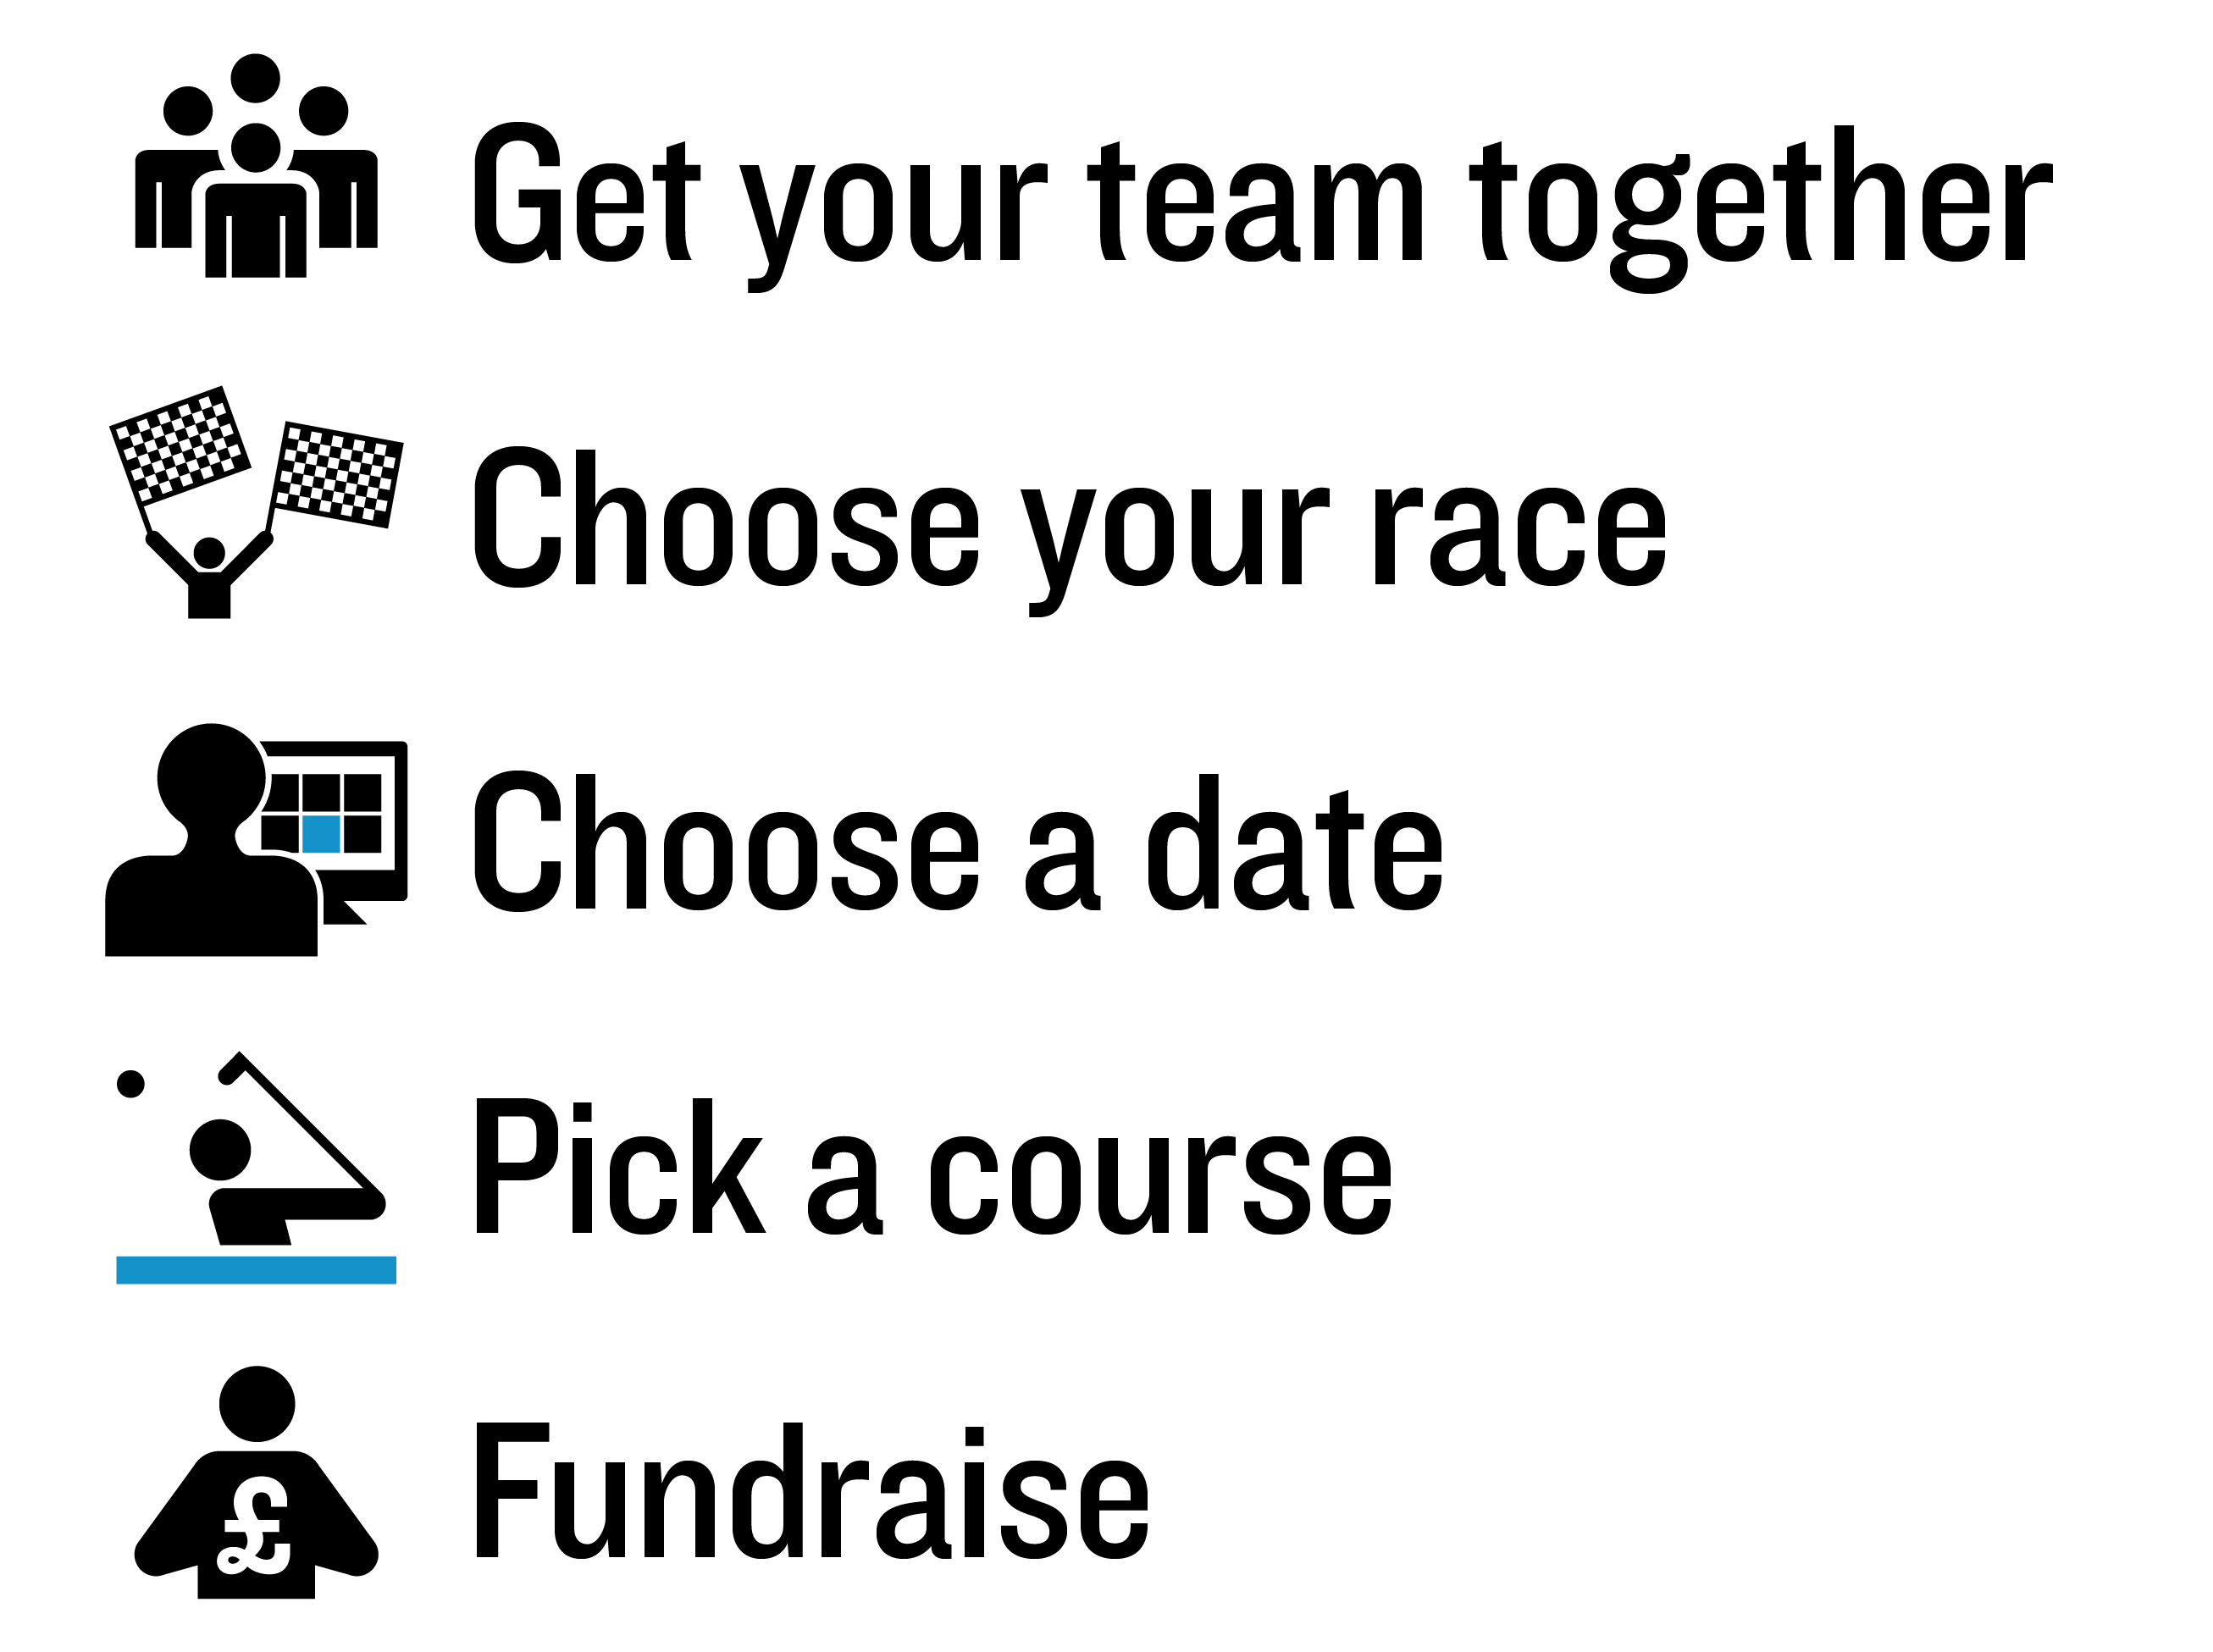 Get your team together, choose your race, choose a date, pick a course, fundraise